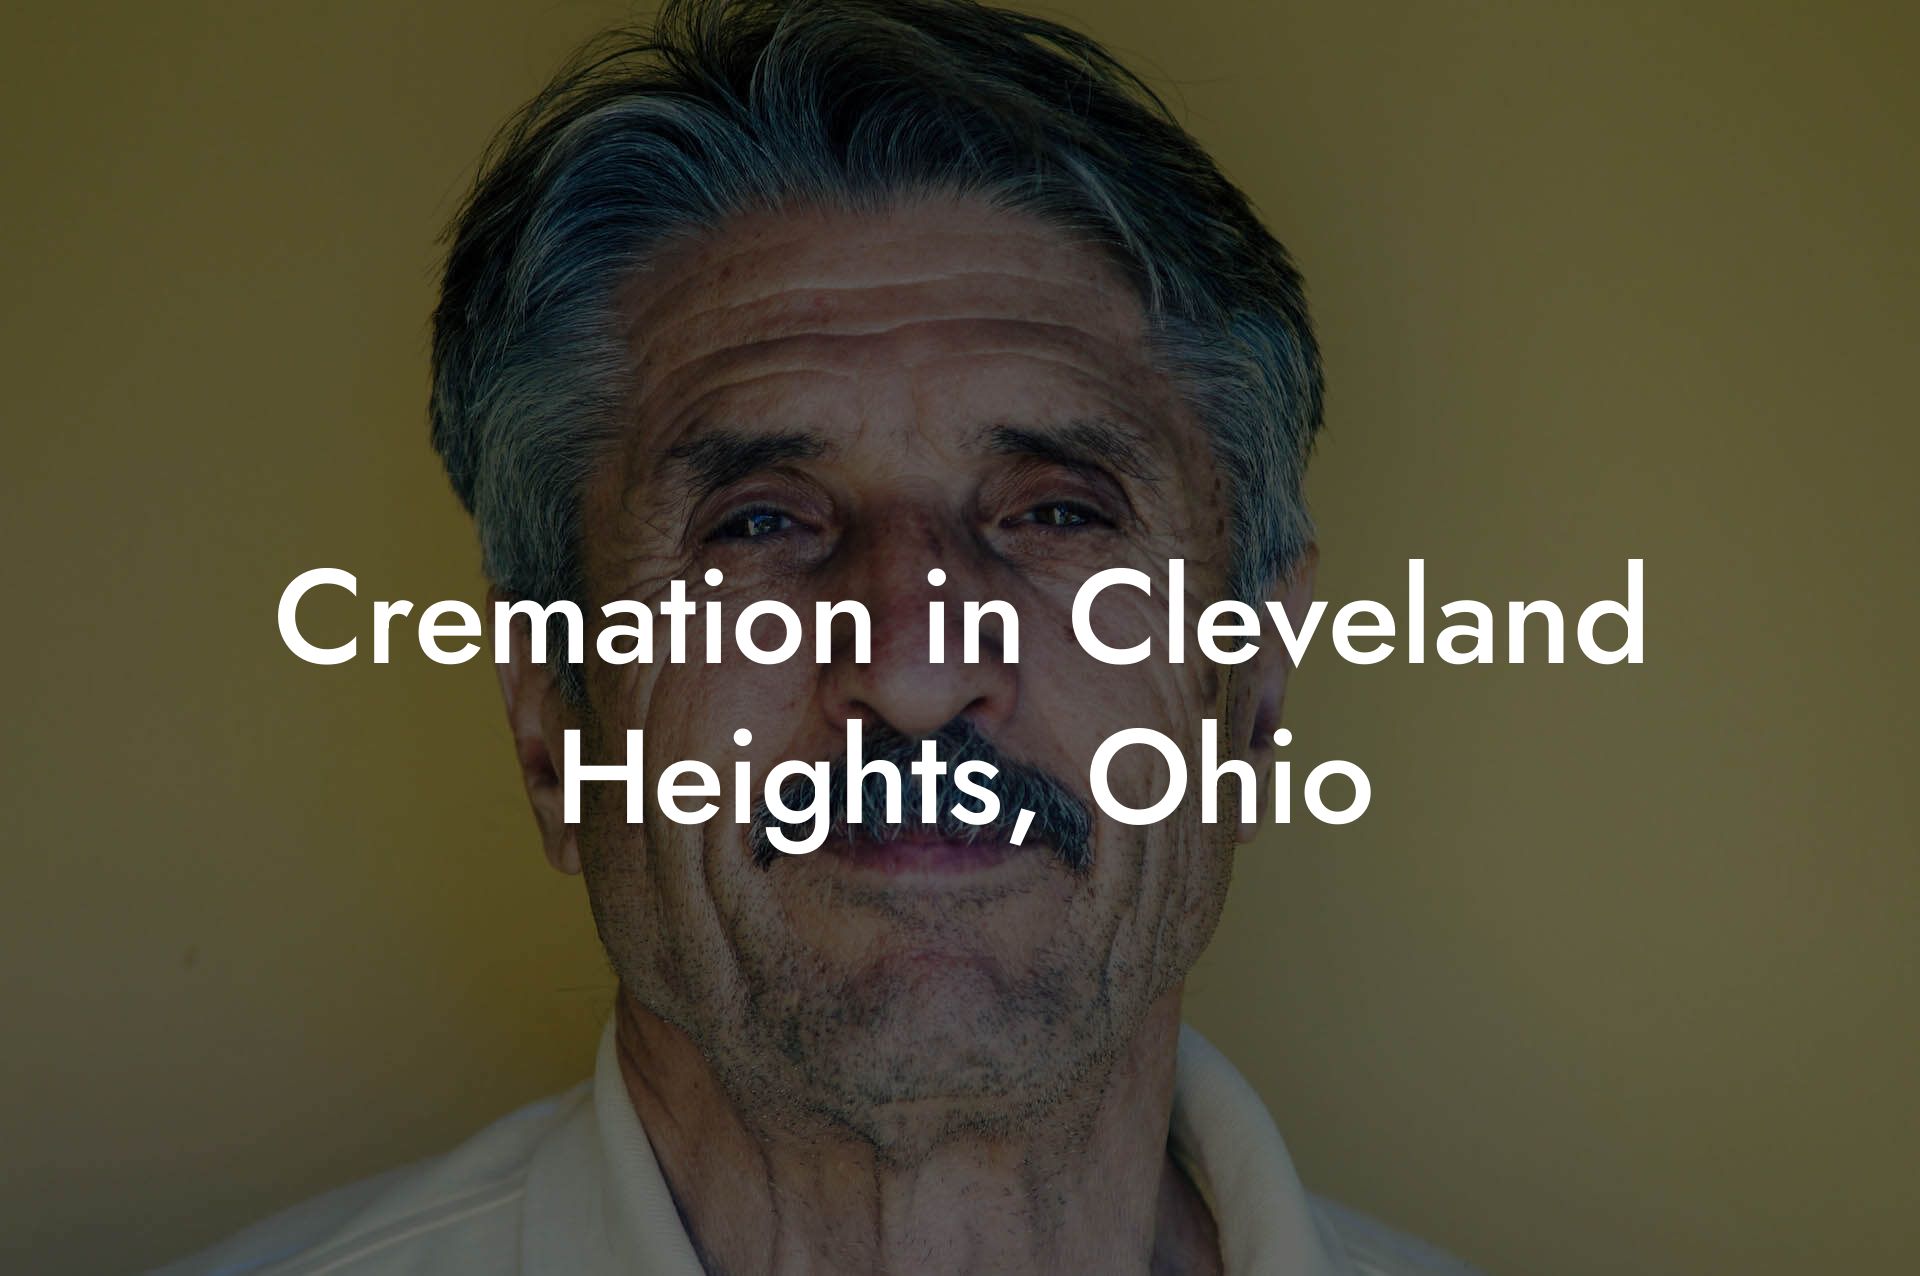 Cremation in Cleveland Heights, Ohio